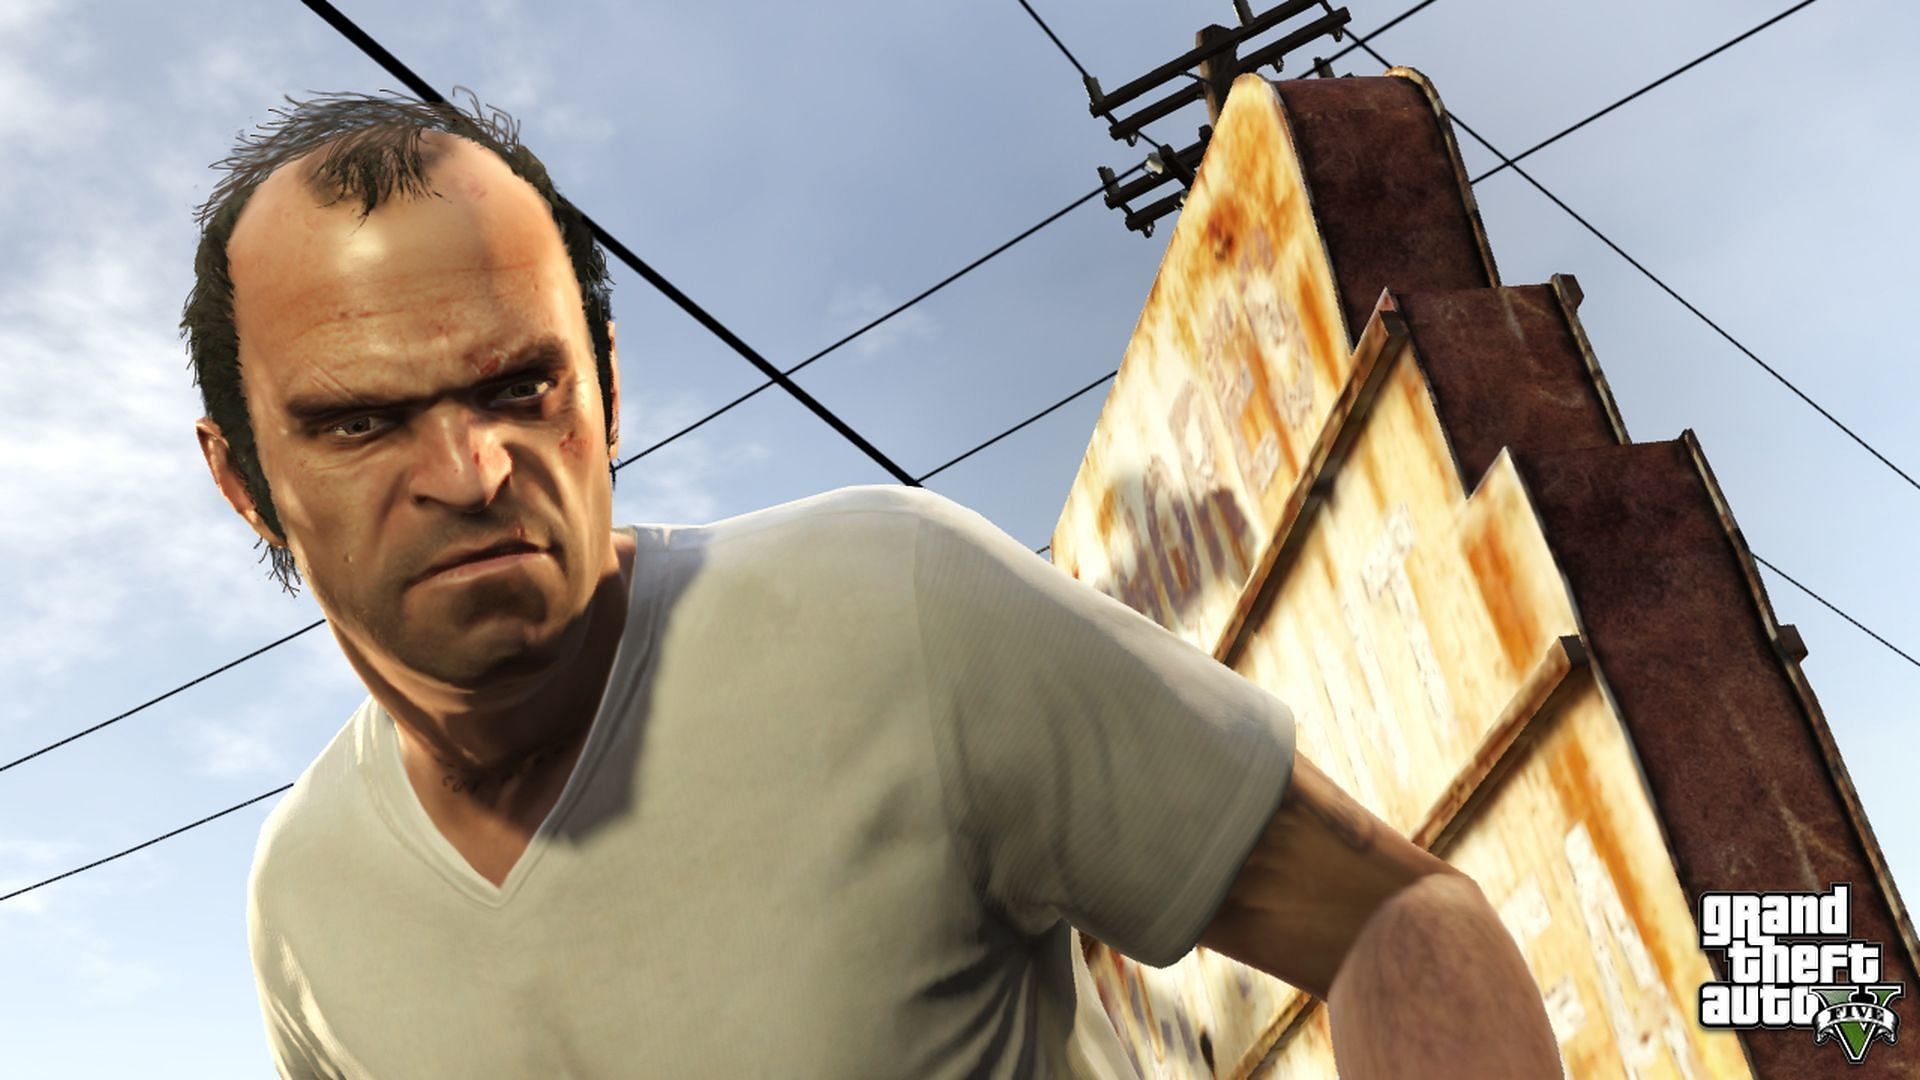 Trevor Philips is probably the most renowned among the GTA 5 protagonists (Image via Rockstar Games)